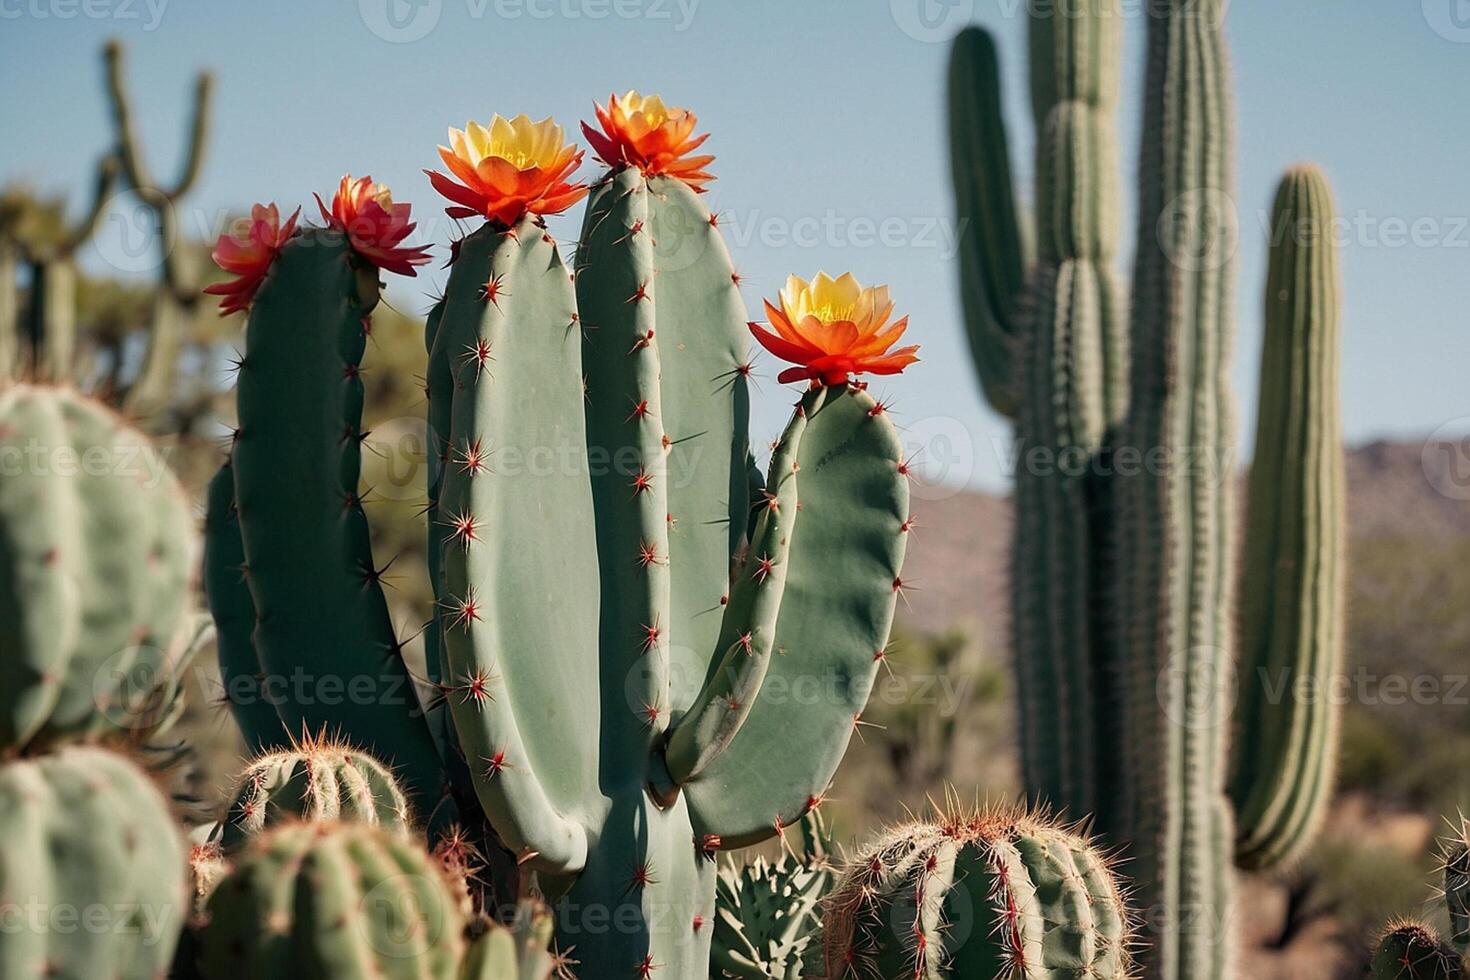 a cactus plant is shown in a desert environment photo